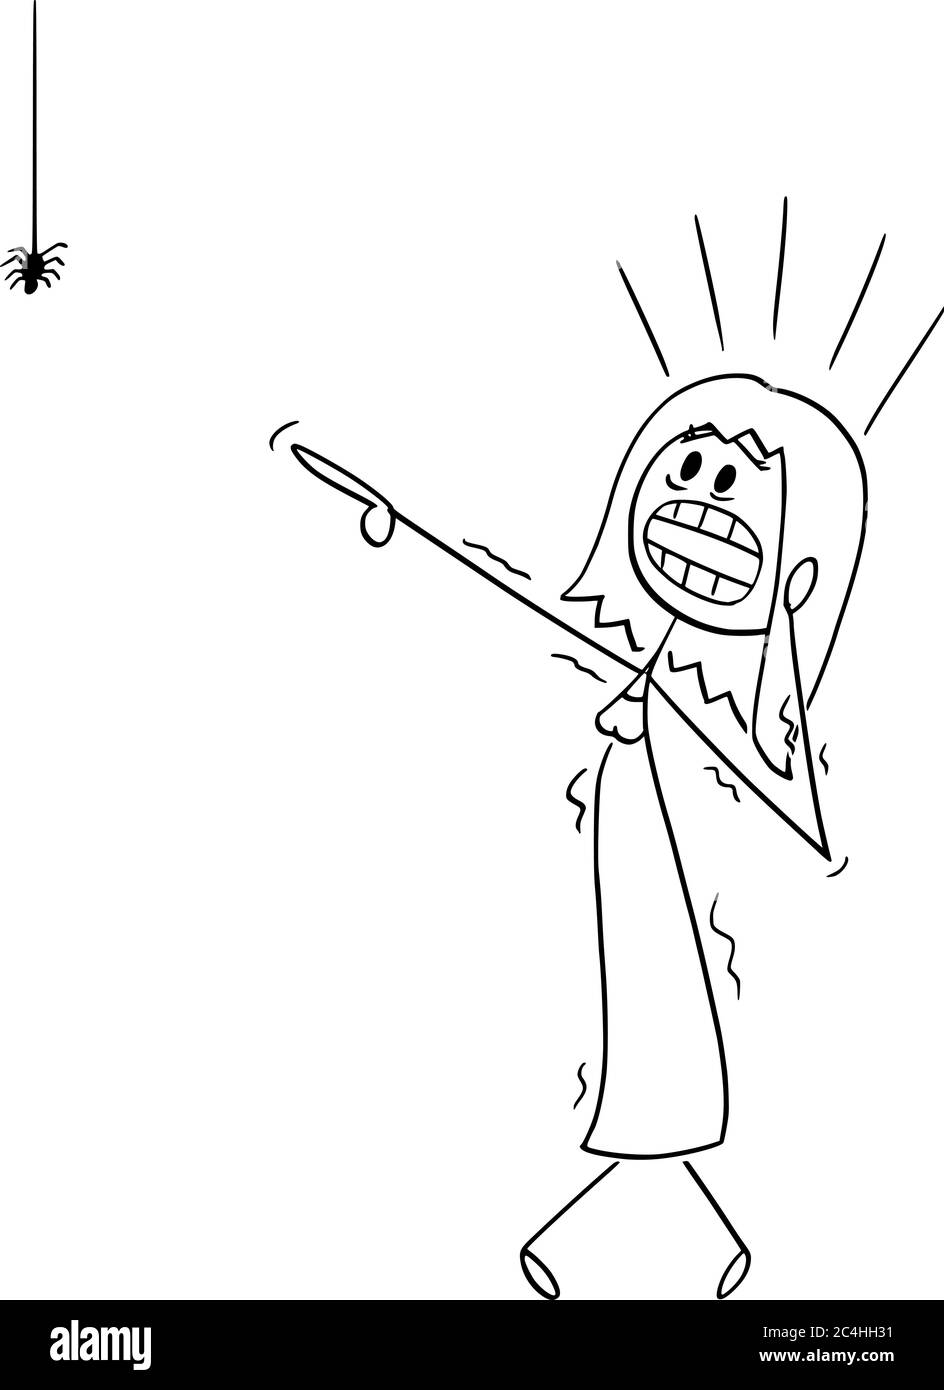 Vector cartoon stick figure drawing conceptual illustration of frightened woman or girl with arachnophobia watching small spider and undergoes panic attack. Stock Vector